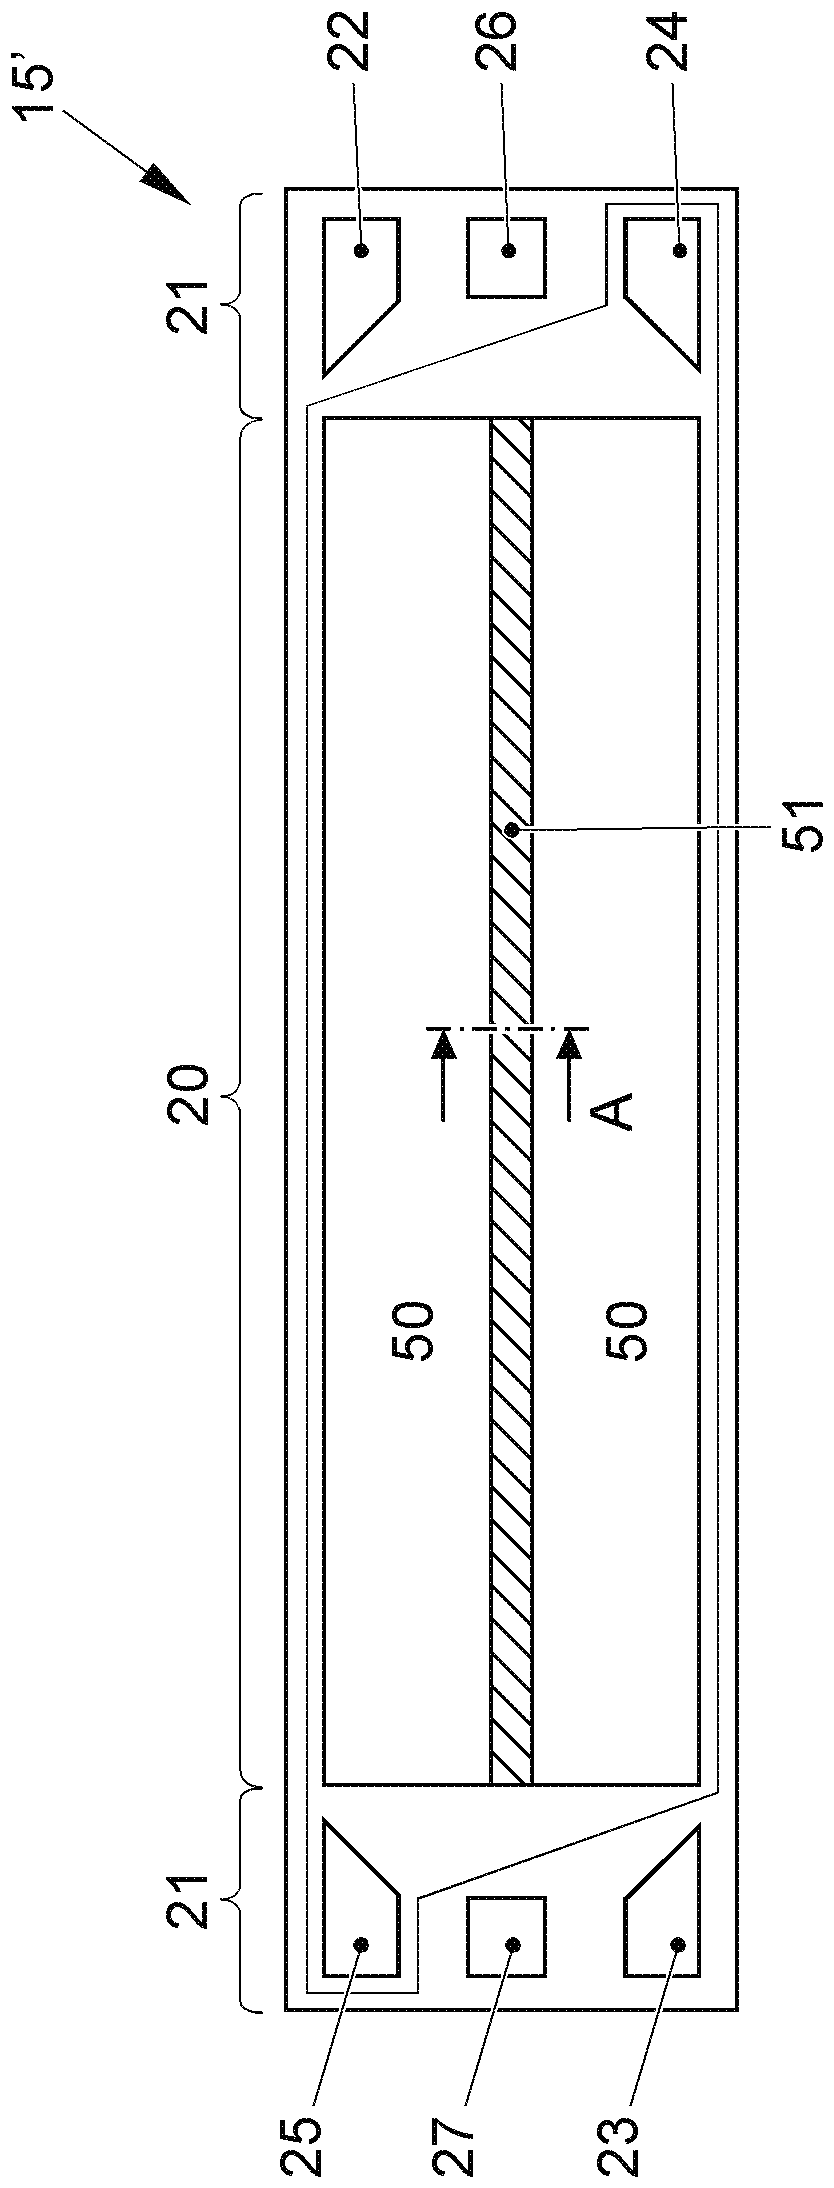 Separator plate, membrane electrode assembly and fuel cell